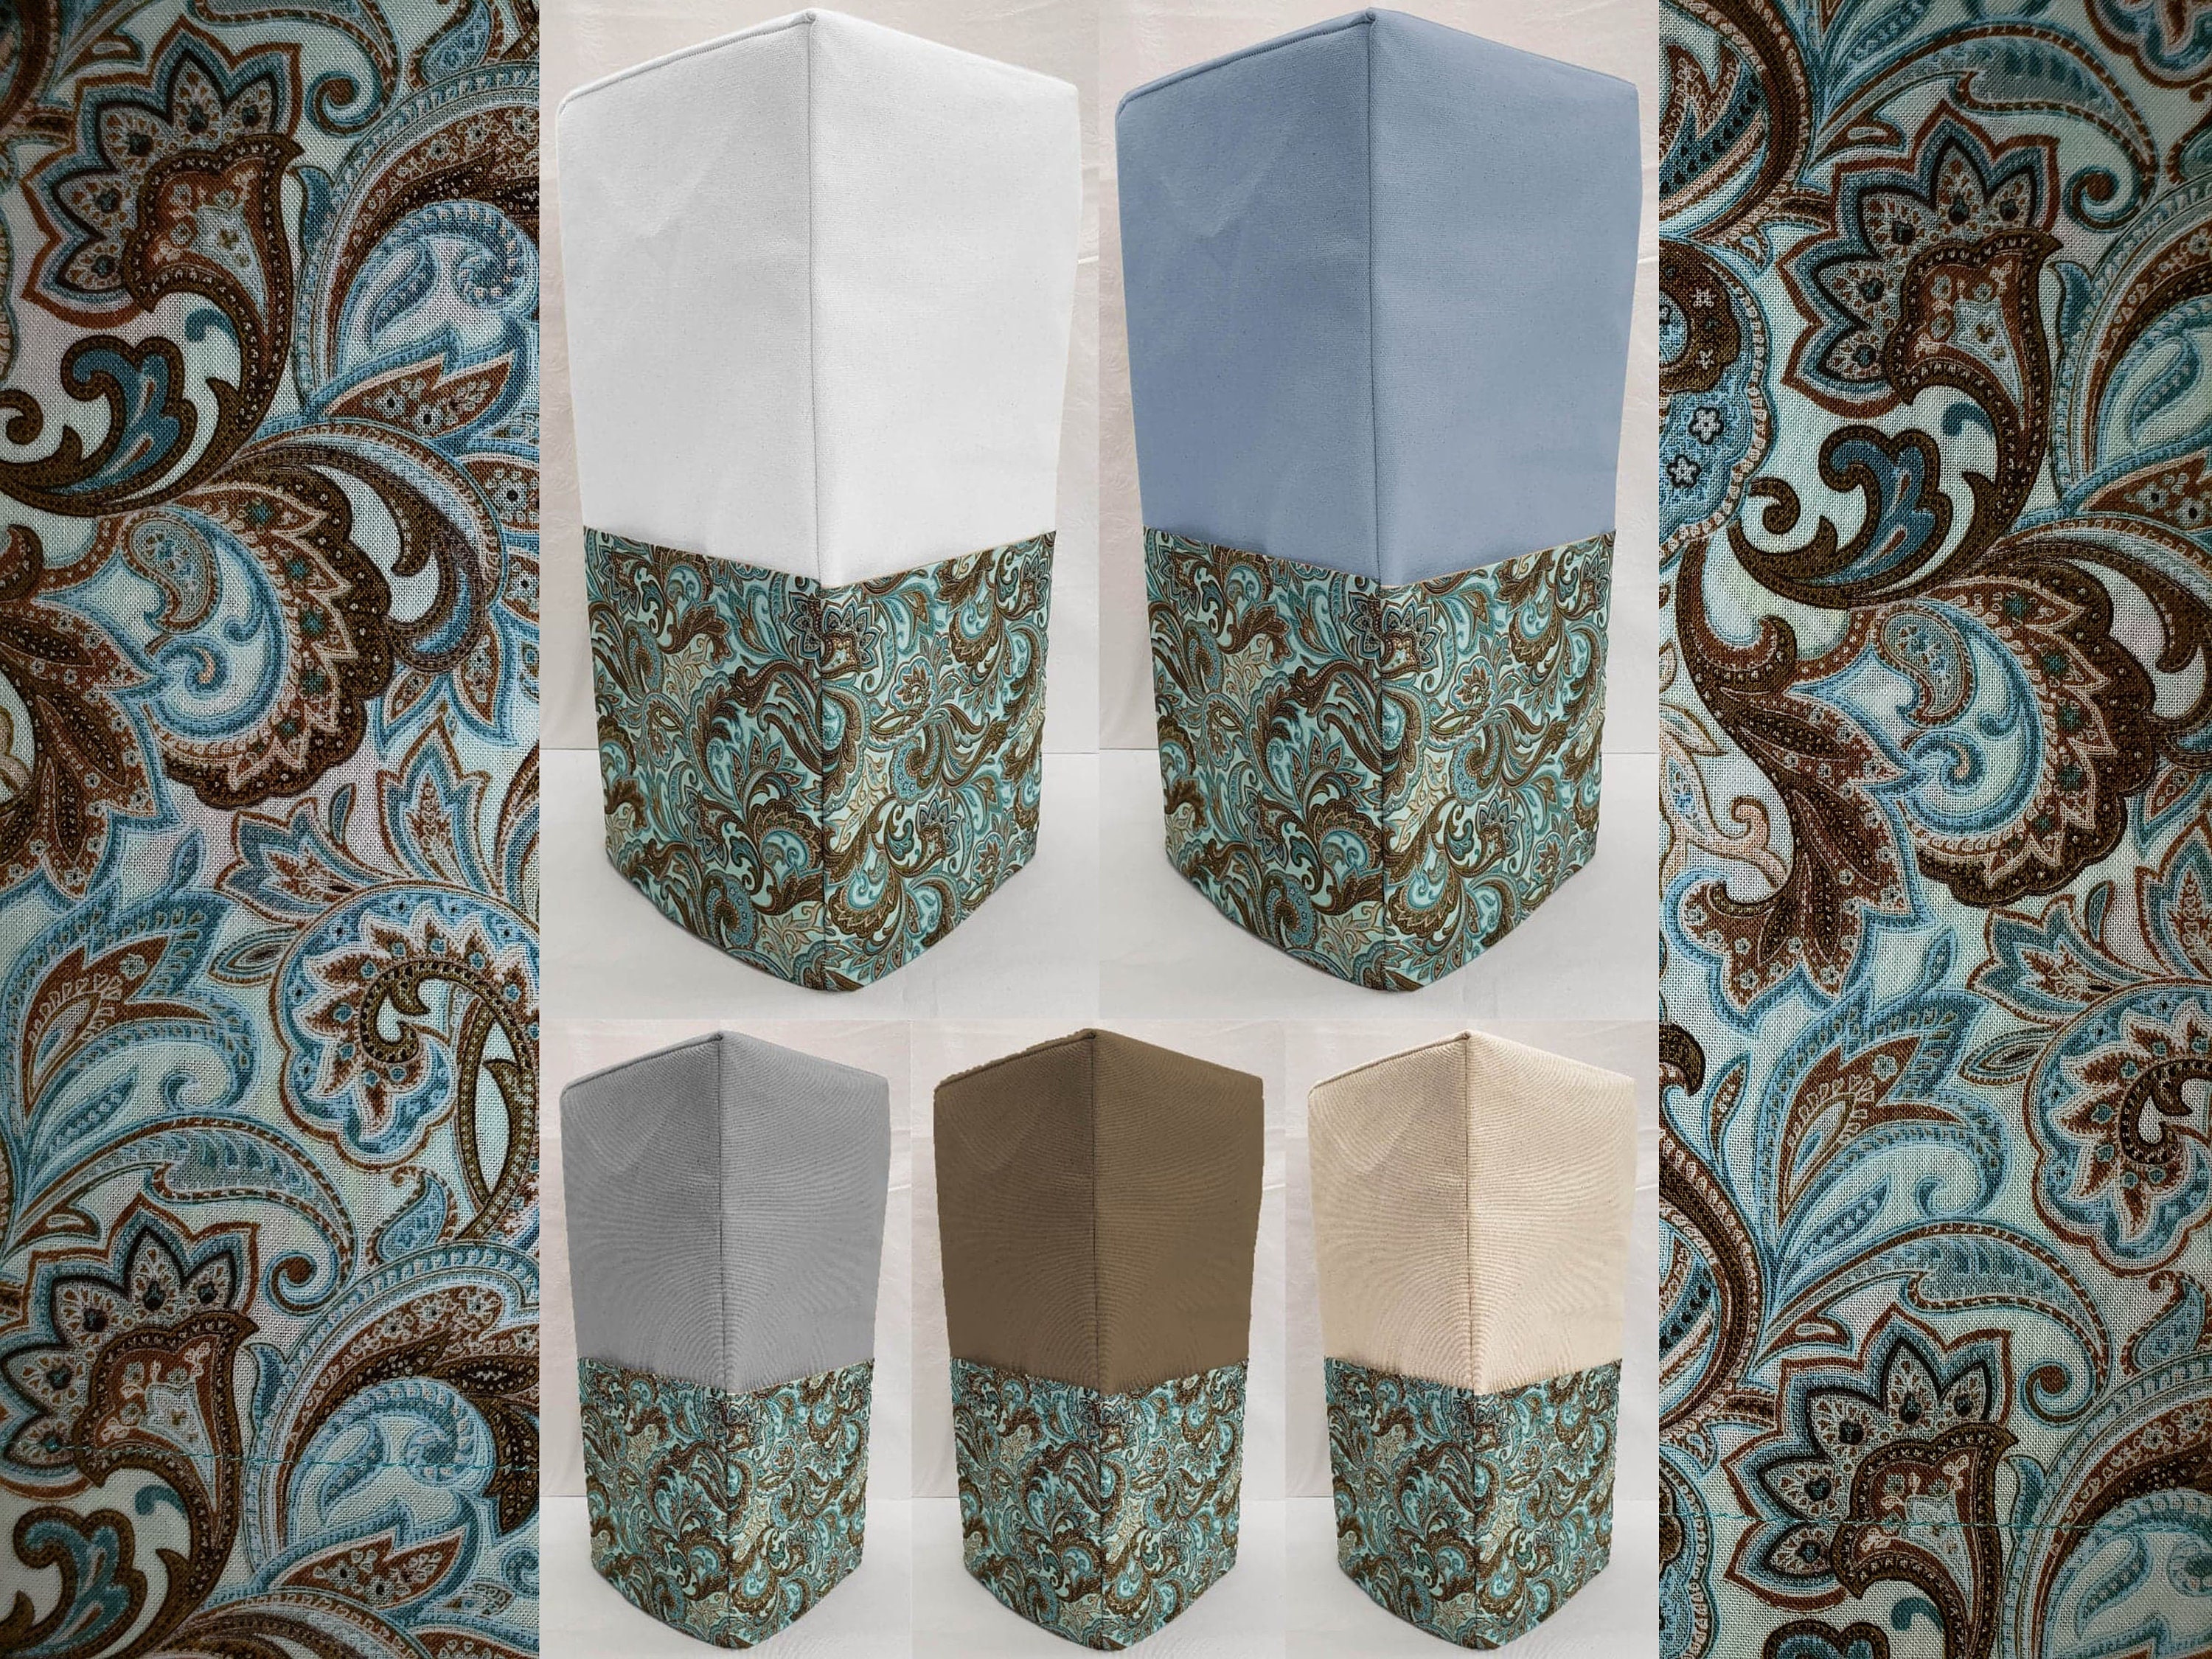 Canvas Brown & Teal Paisley Blender Cover | Sizing Chart Located in Item Details